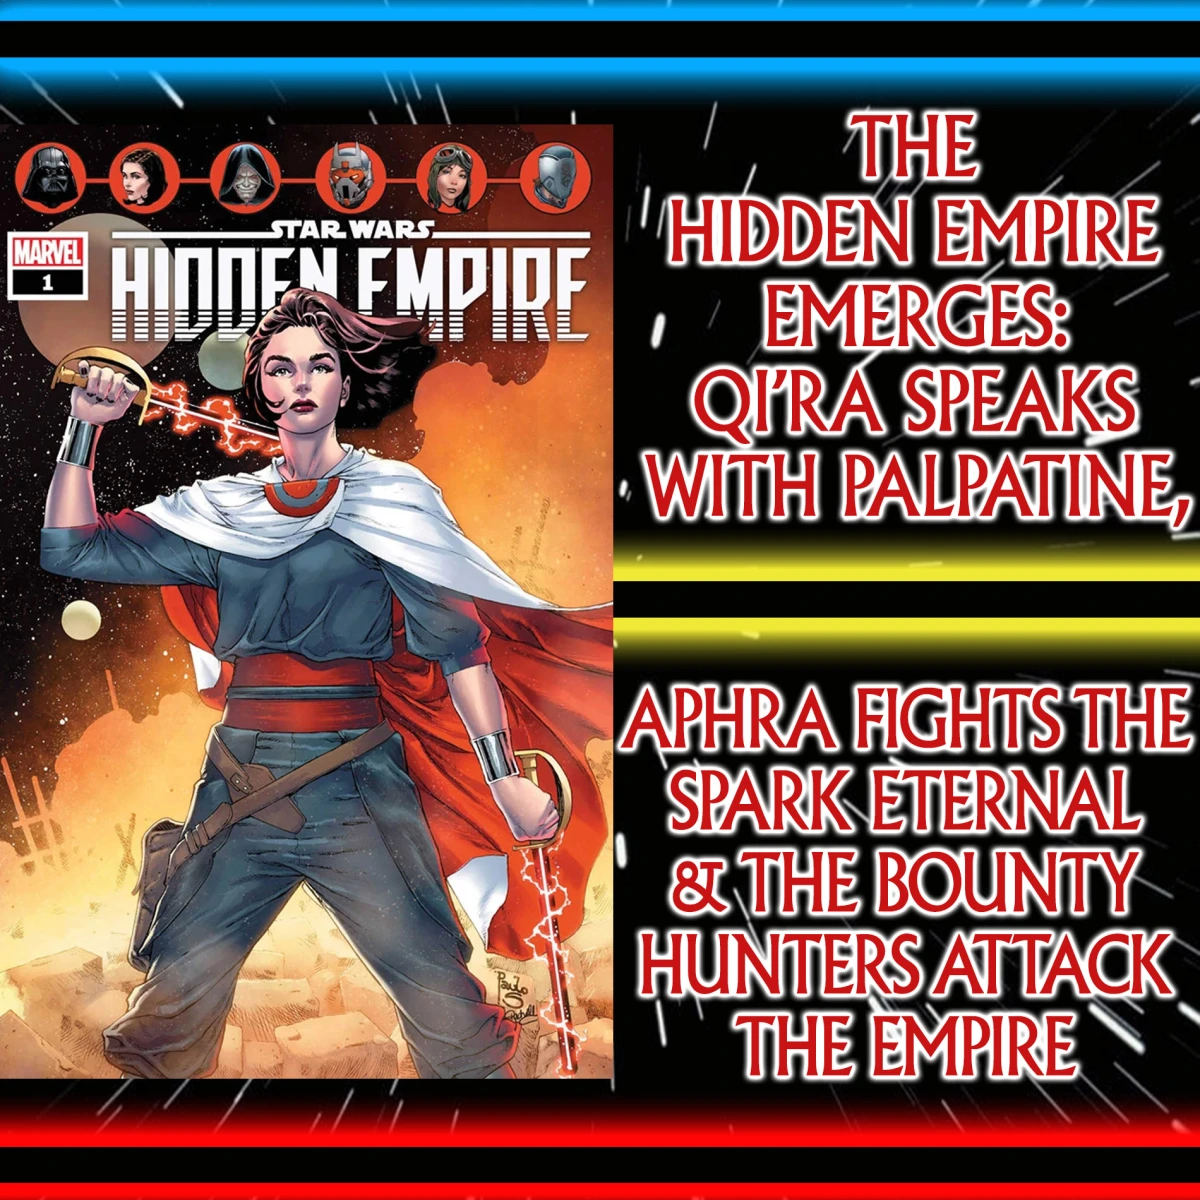 Star Wars: Comics In Canon: Hidden Empire Emerges: Qi’ra Speaks With Palpatine, Aphra Fights The Spark Eternal & The Bounty Hunters Attack The Empire (HE1, DA27 & BH29) – Ep 121